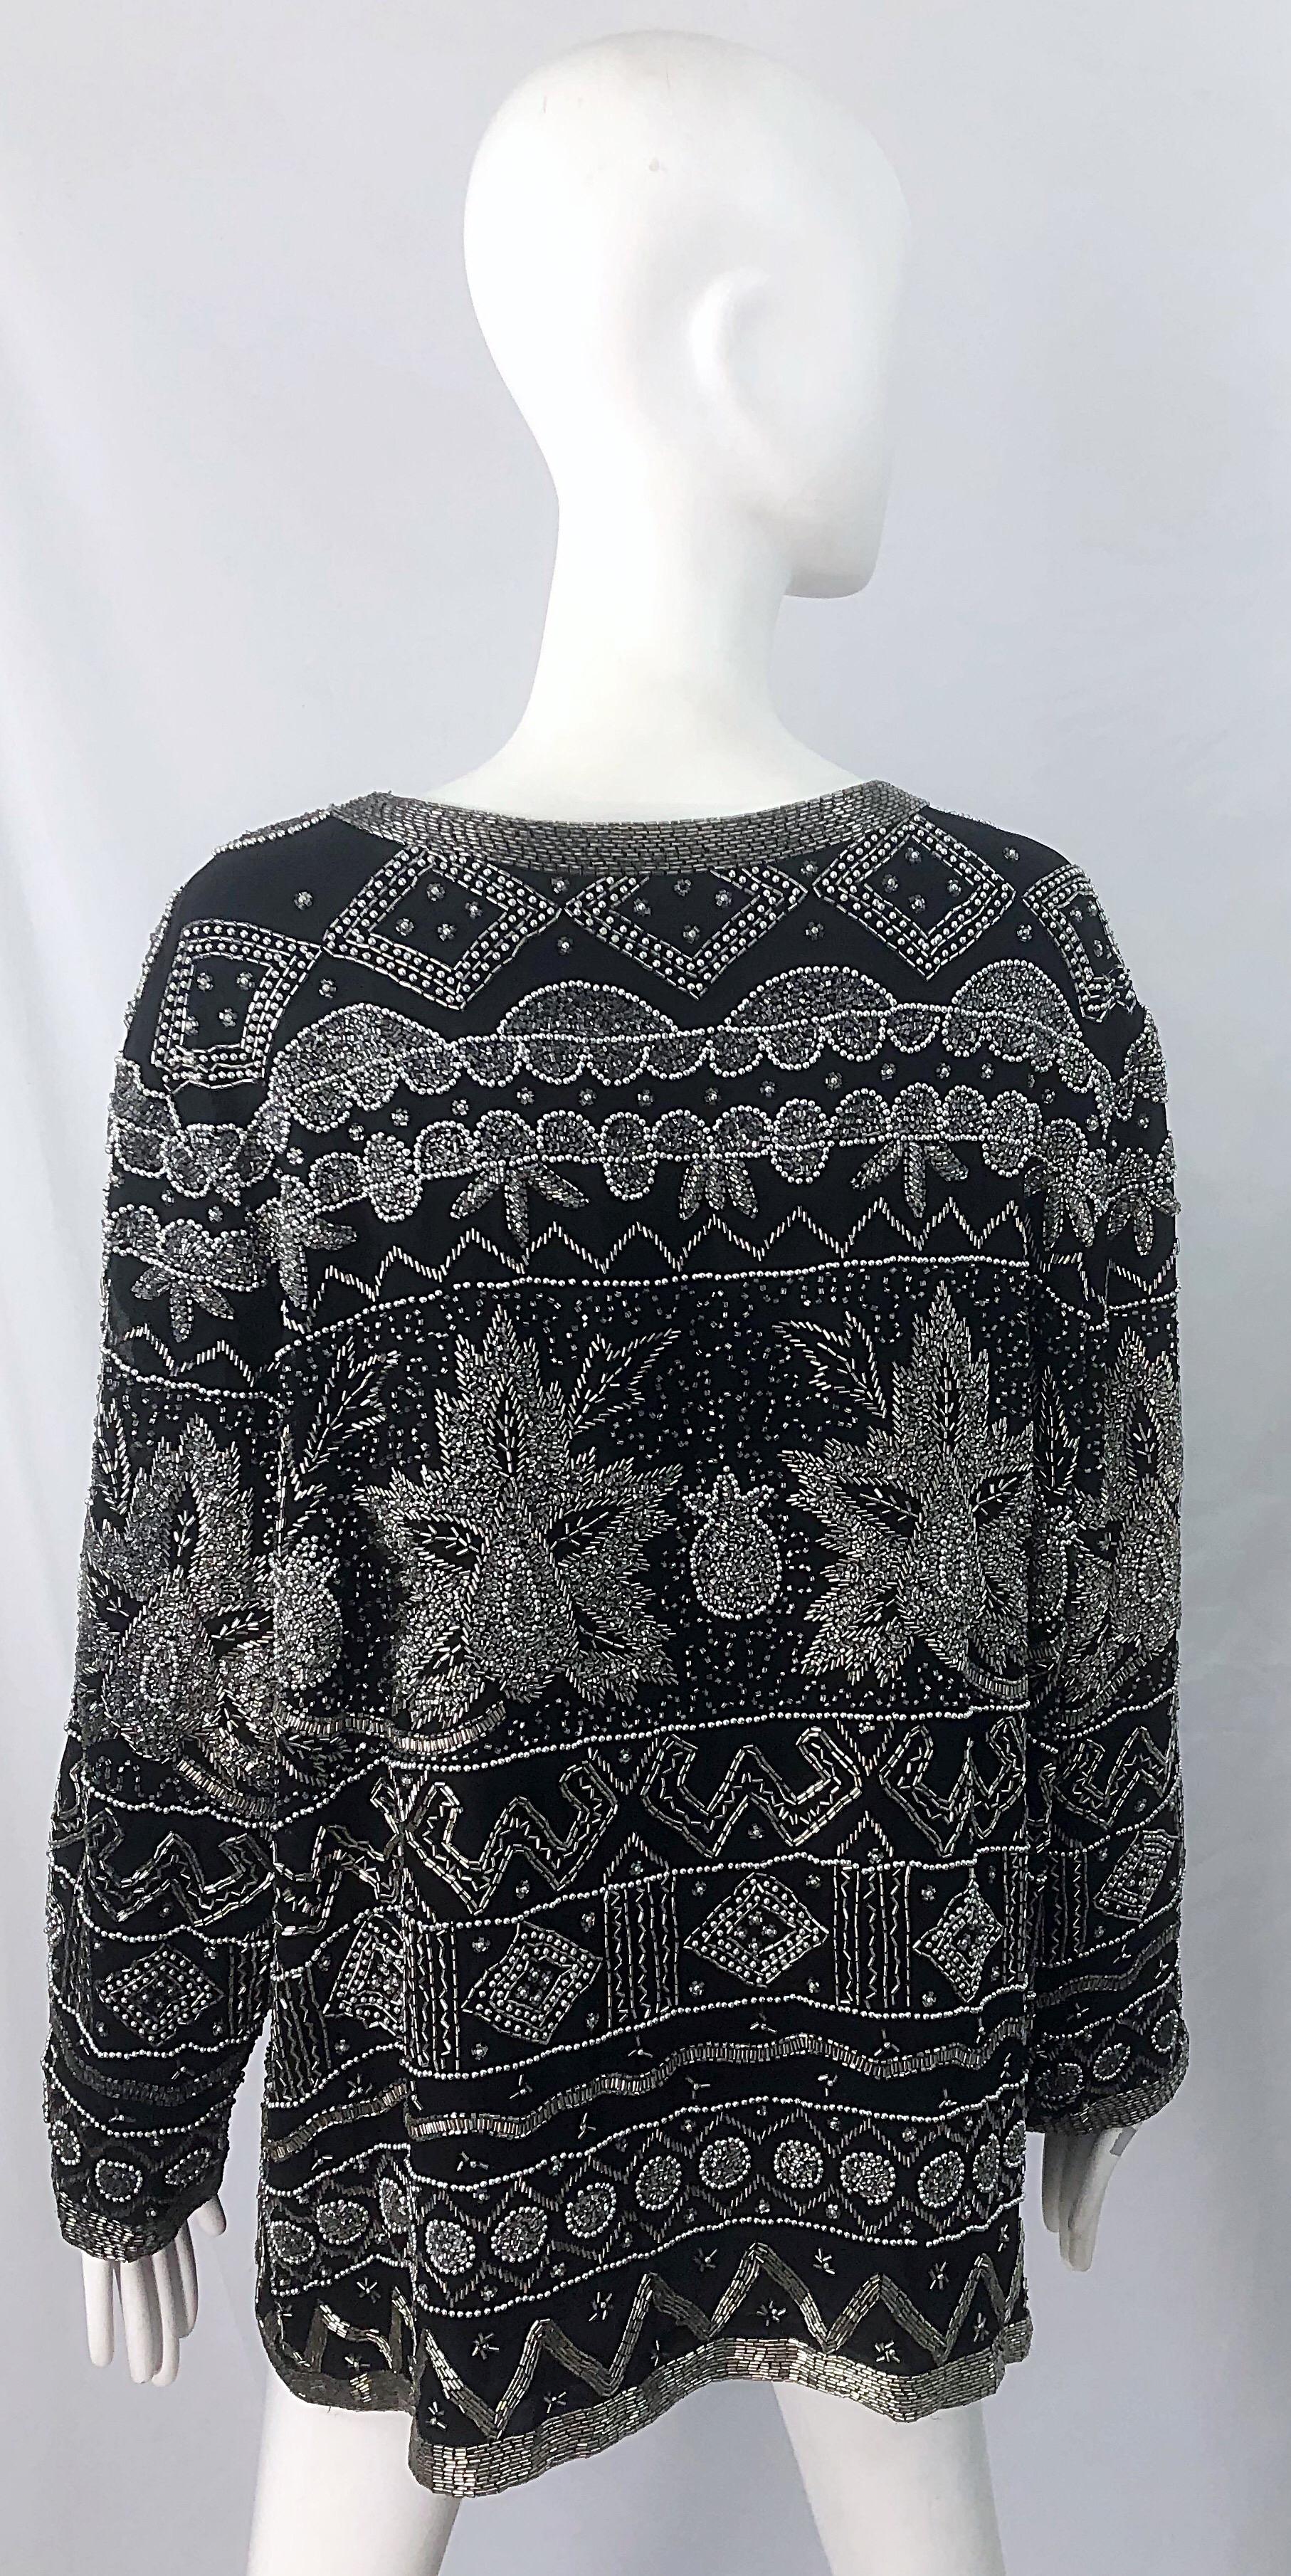 Intricate 1990s Heavily Beaded 3XL Black Silver Sequined Vintage 90s Jacket Top For Sale 9